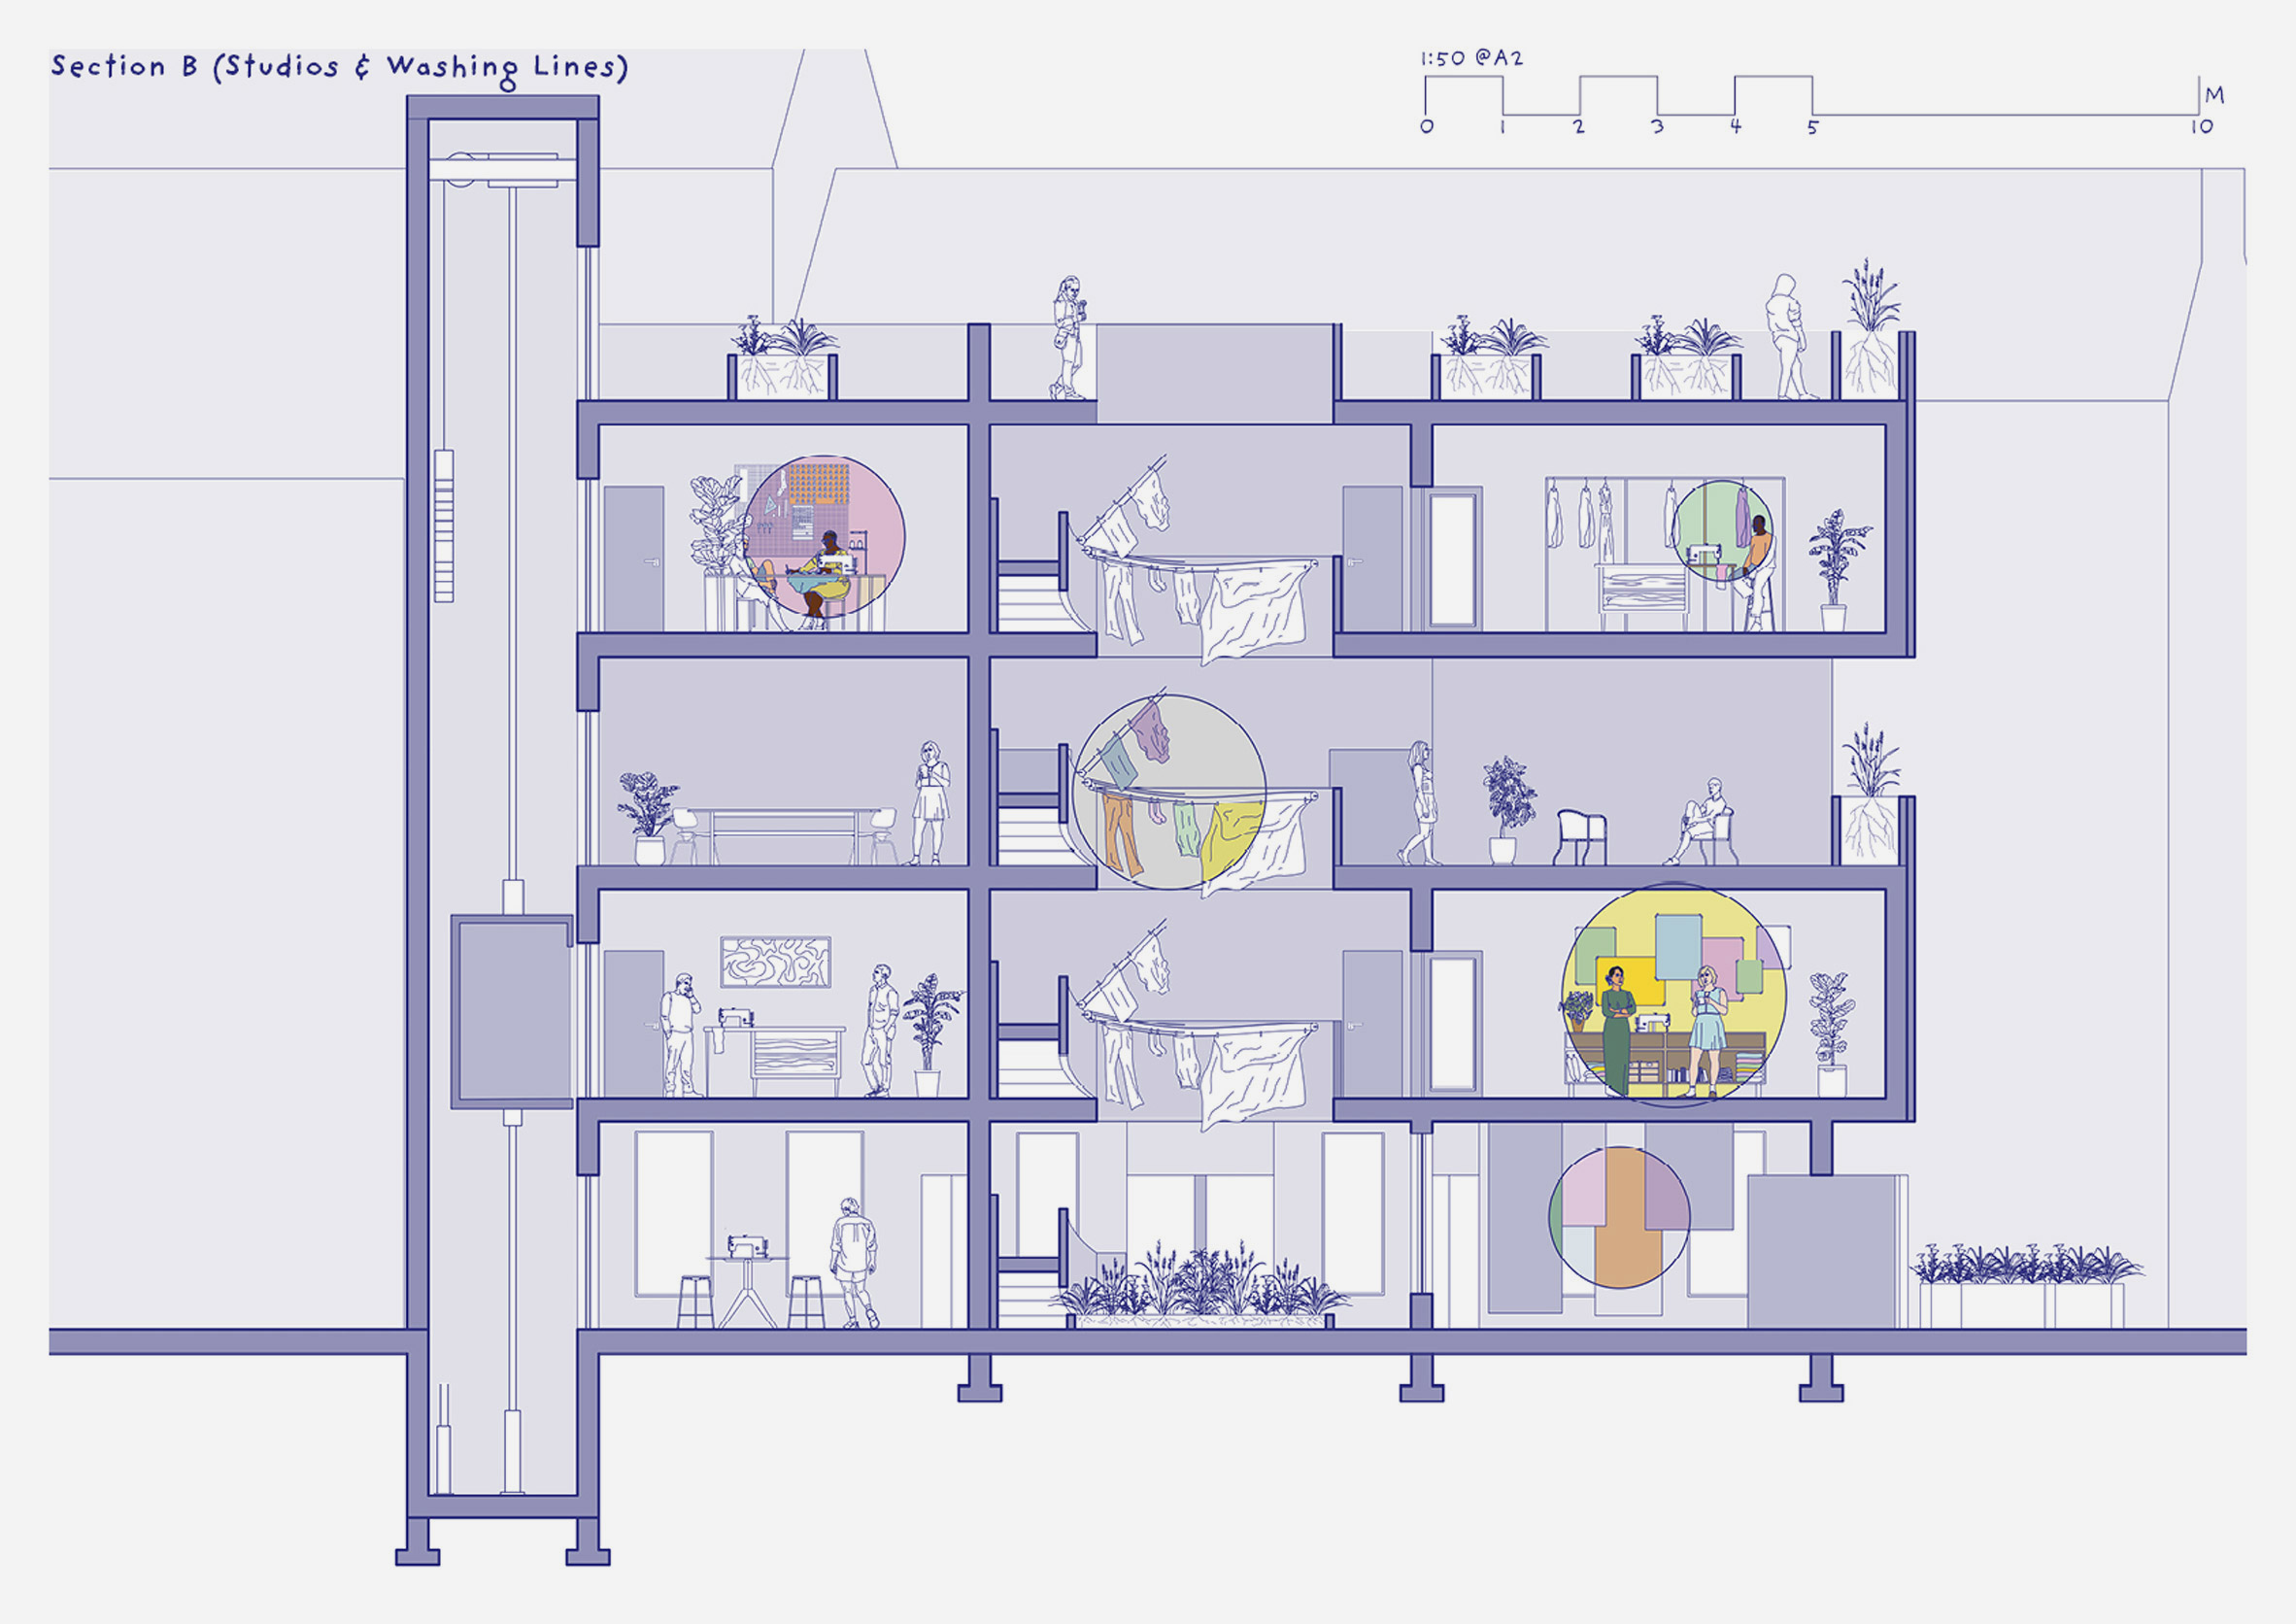 Illustrated section drawing of a live-work apartment